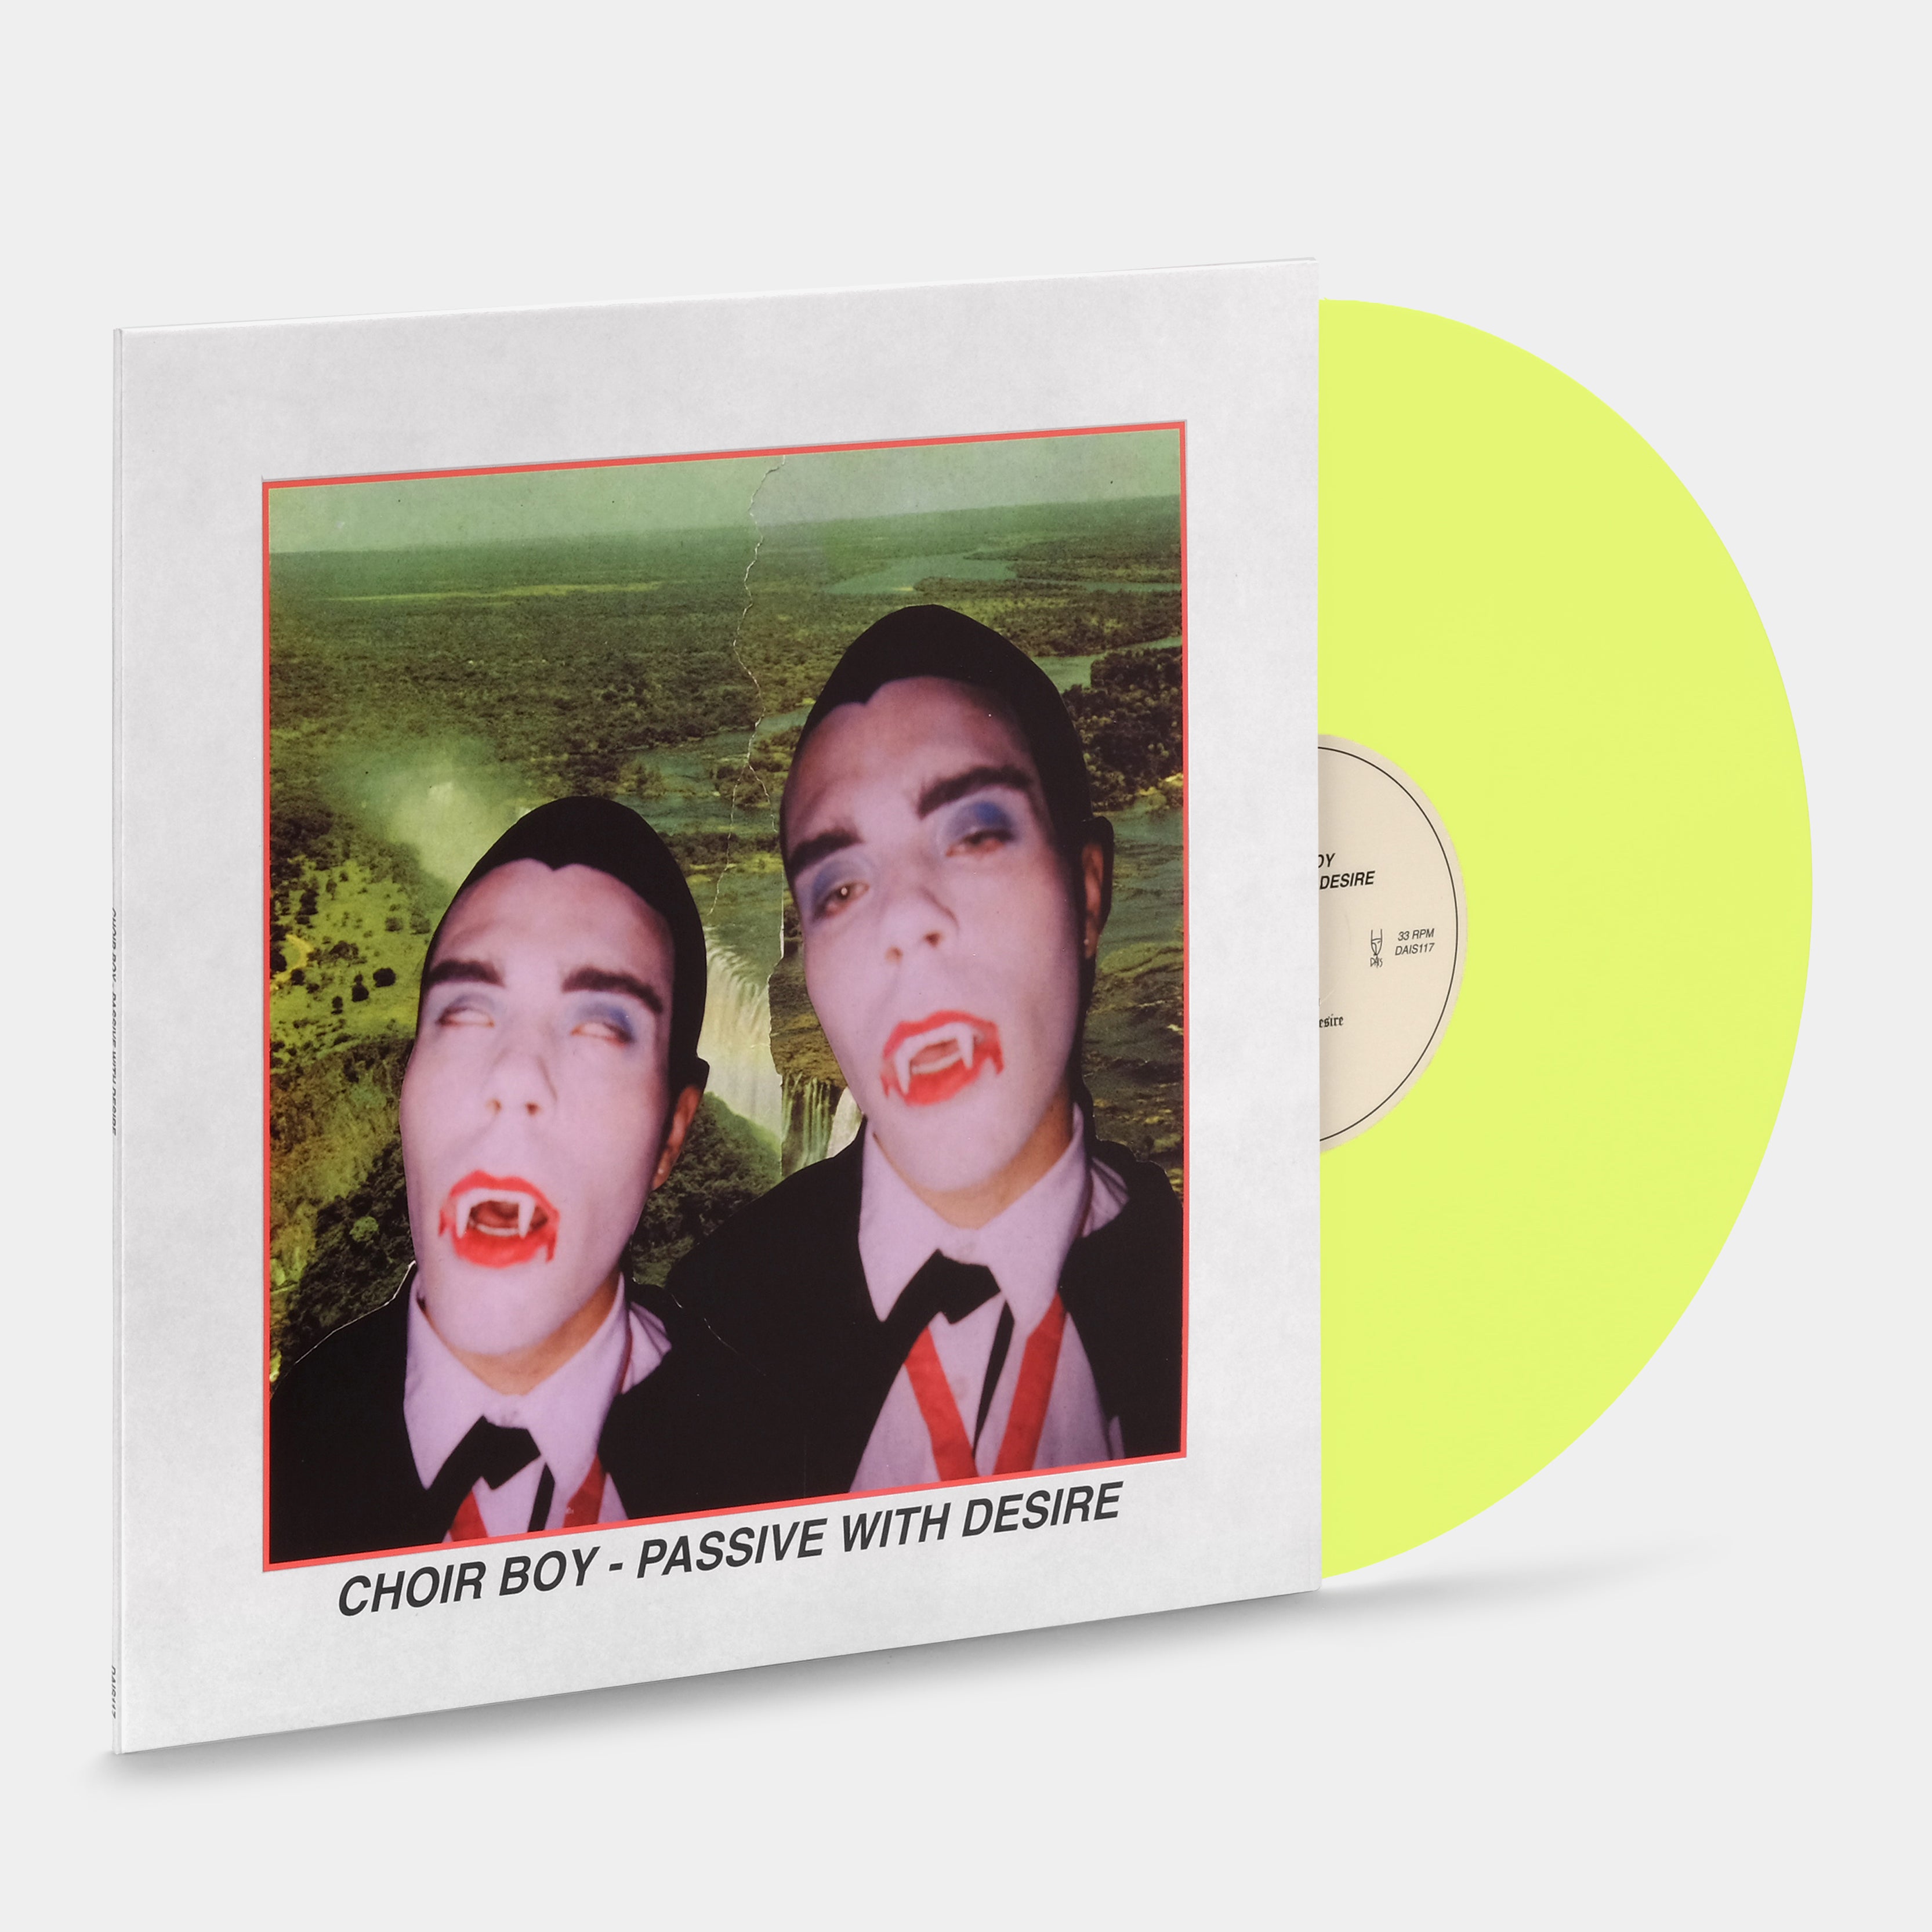 Choir Boy - Passive With Desire Limited Edition LP Opaque Banana Vinyl Record